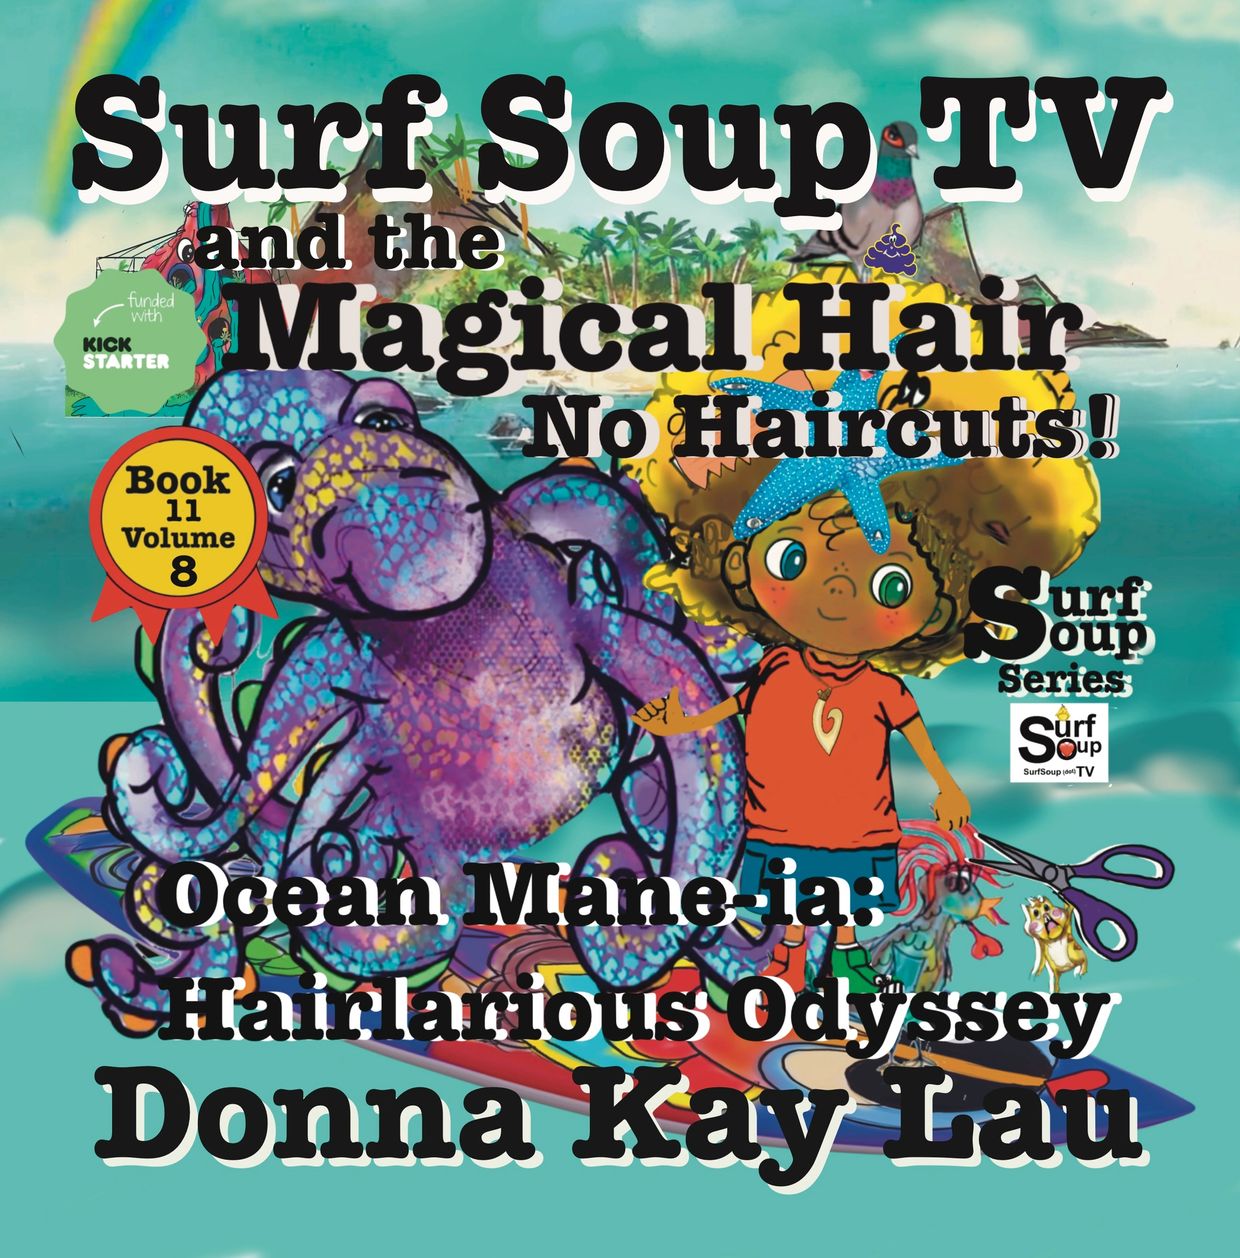 Surf Soup magical hair no to haircuts Donna Kay Lau Tv animator author book 11 volume 8